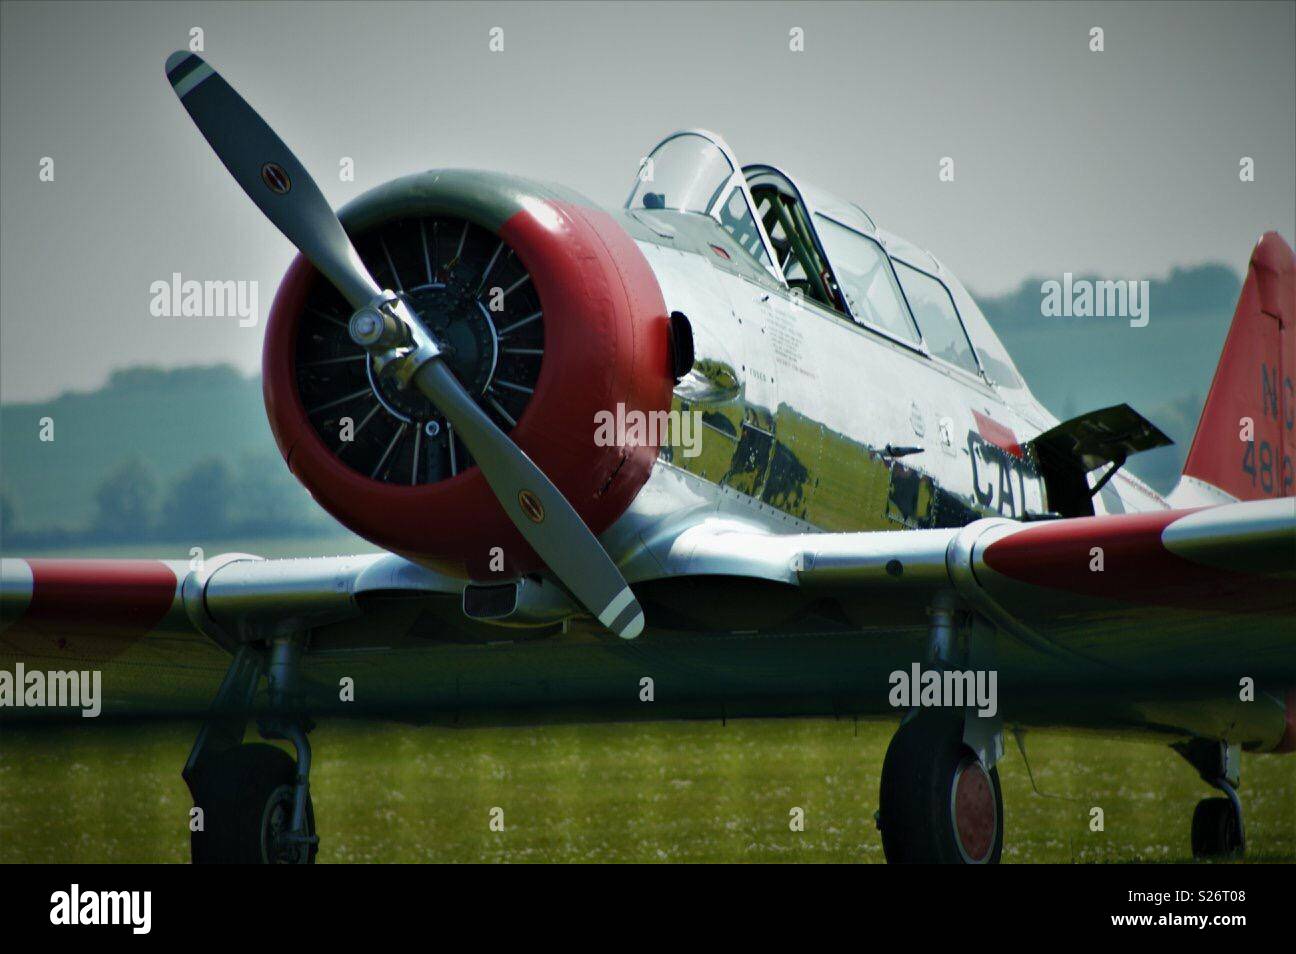 Shiny plane with propeller at Duxford Stock Photo